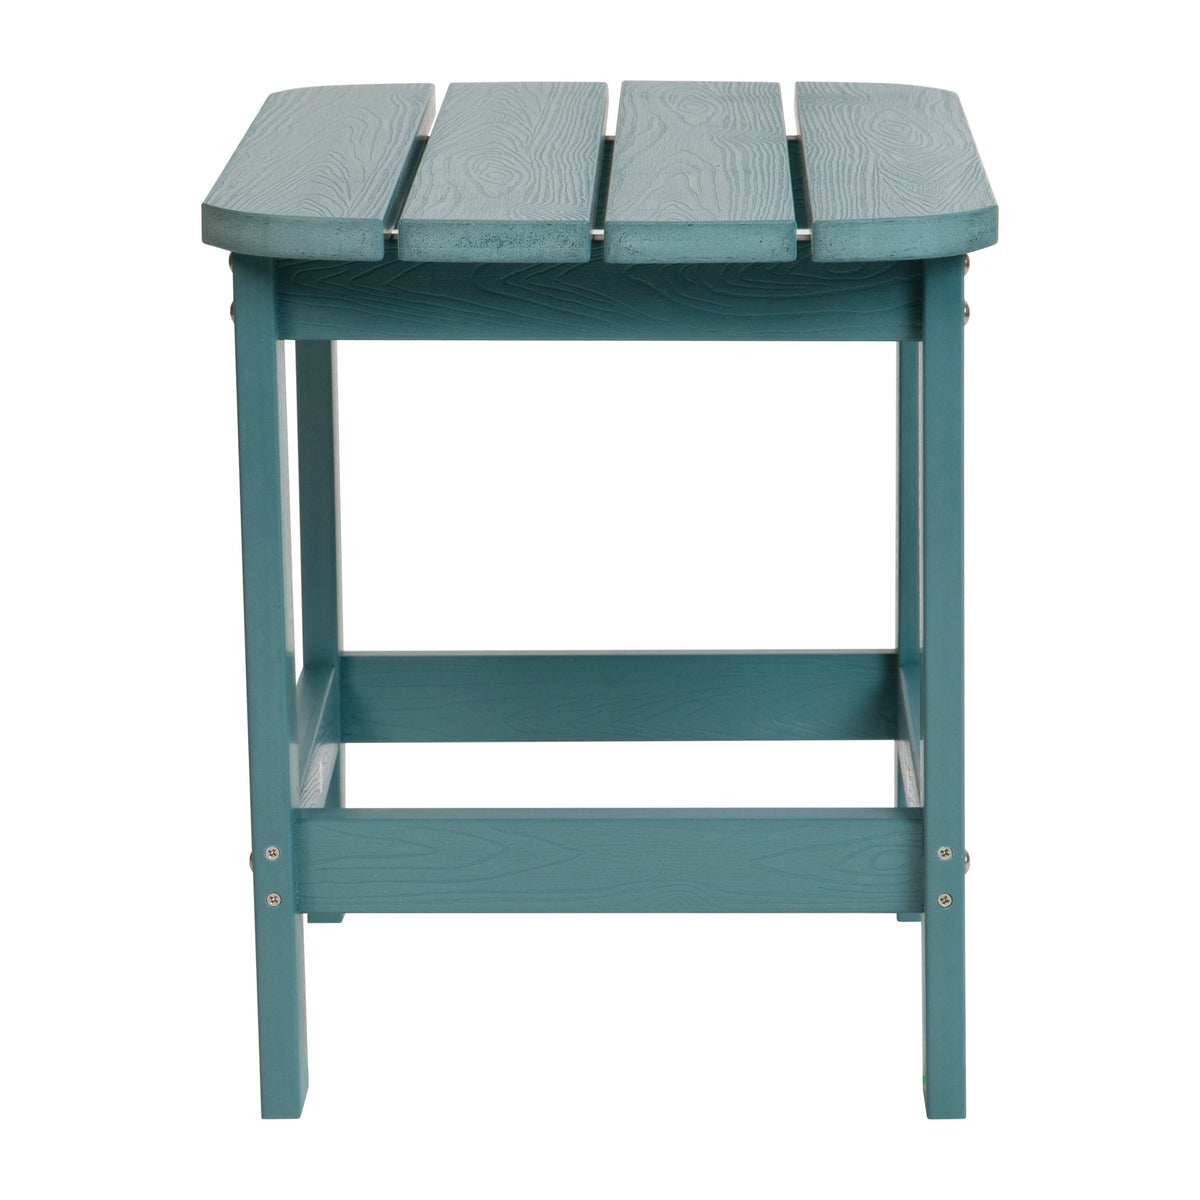 Teal |#| All-Weather Poly Resin Adirondack Side Table in Teal - Patio Table